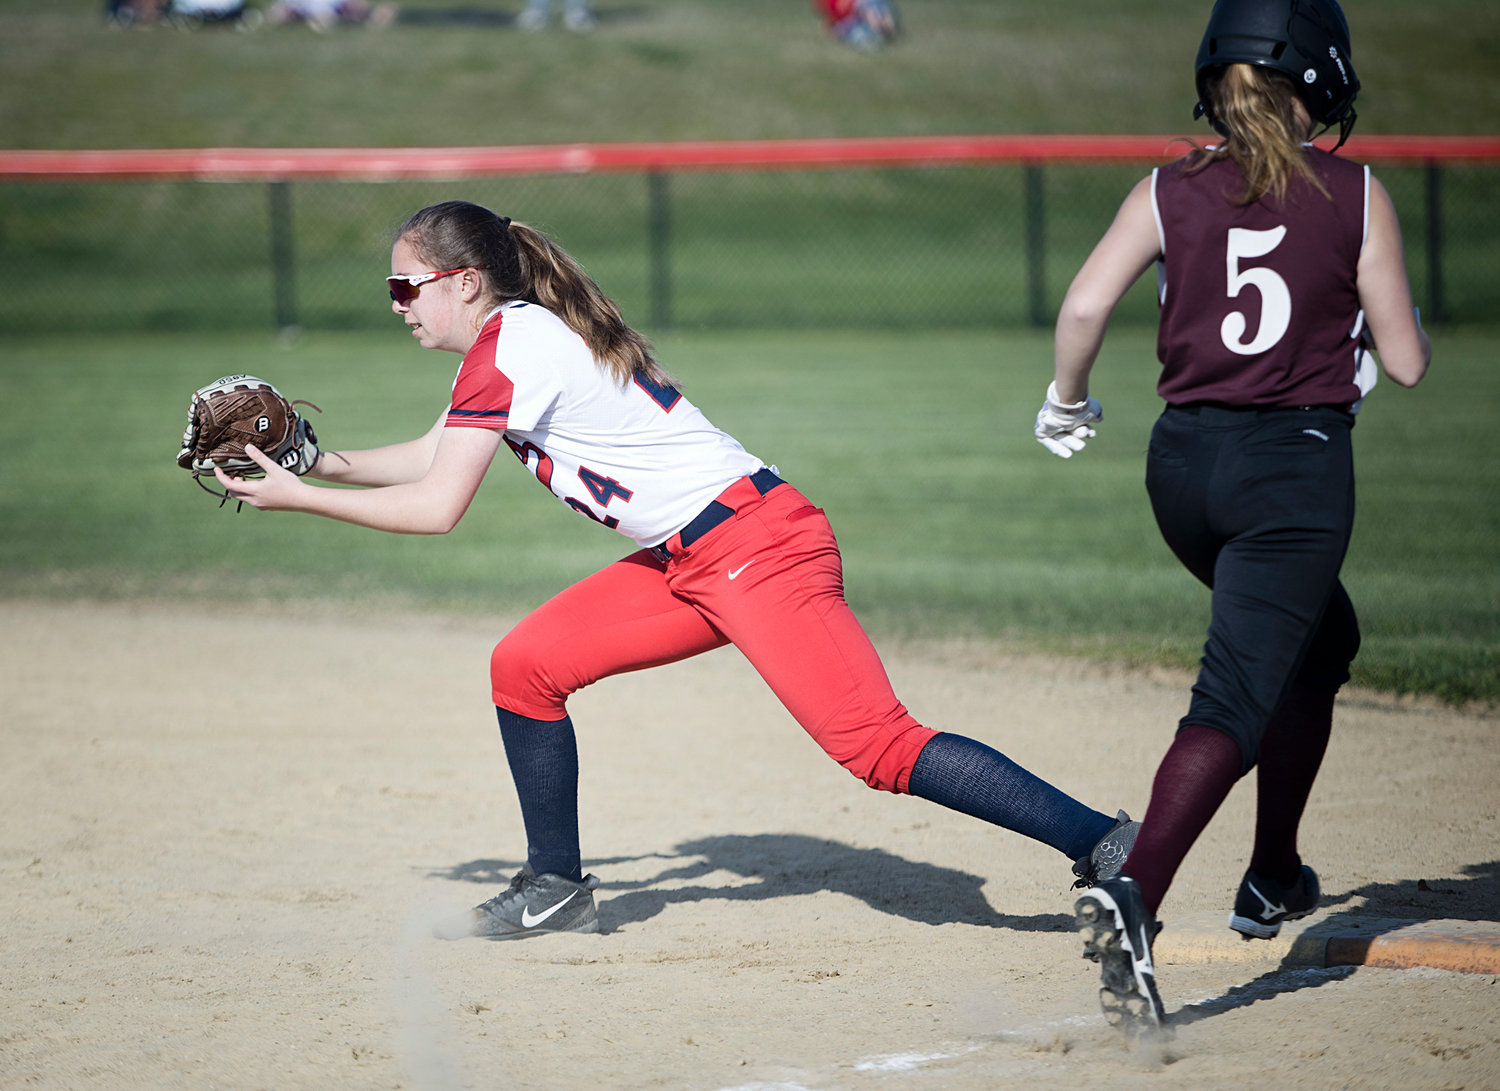 Kaelyn Mahoney attempts to make a play at first as a Tiverton runner reaches the bag.